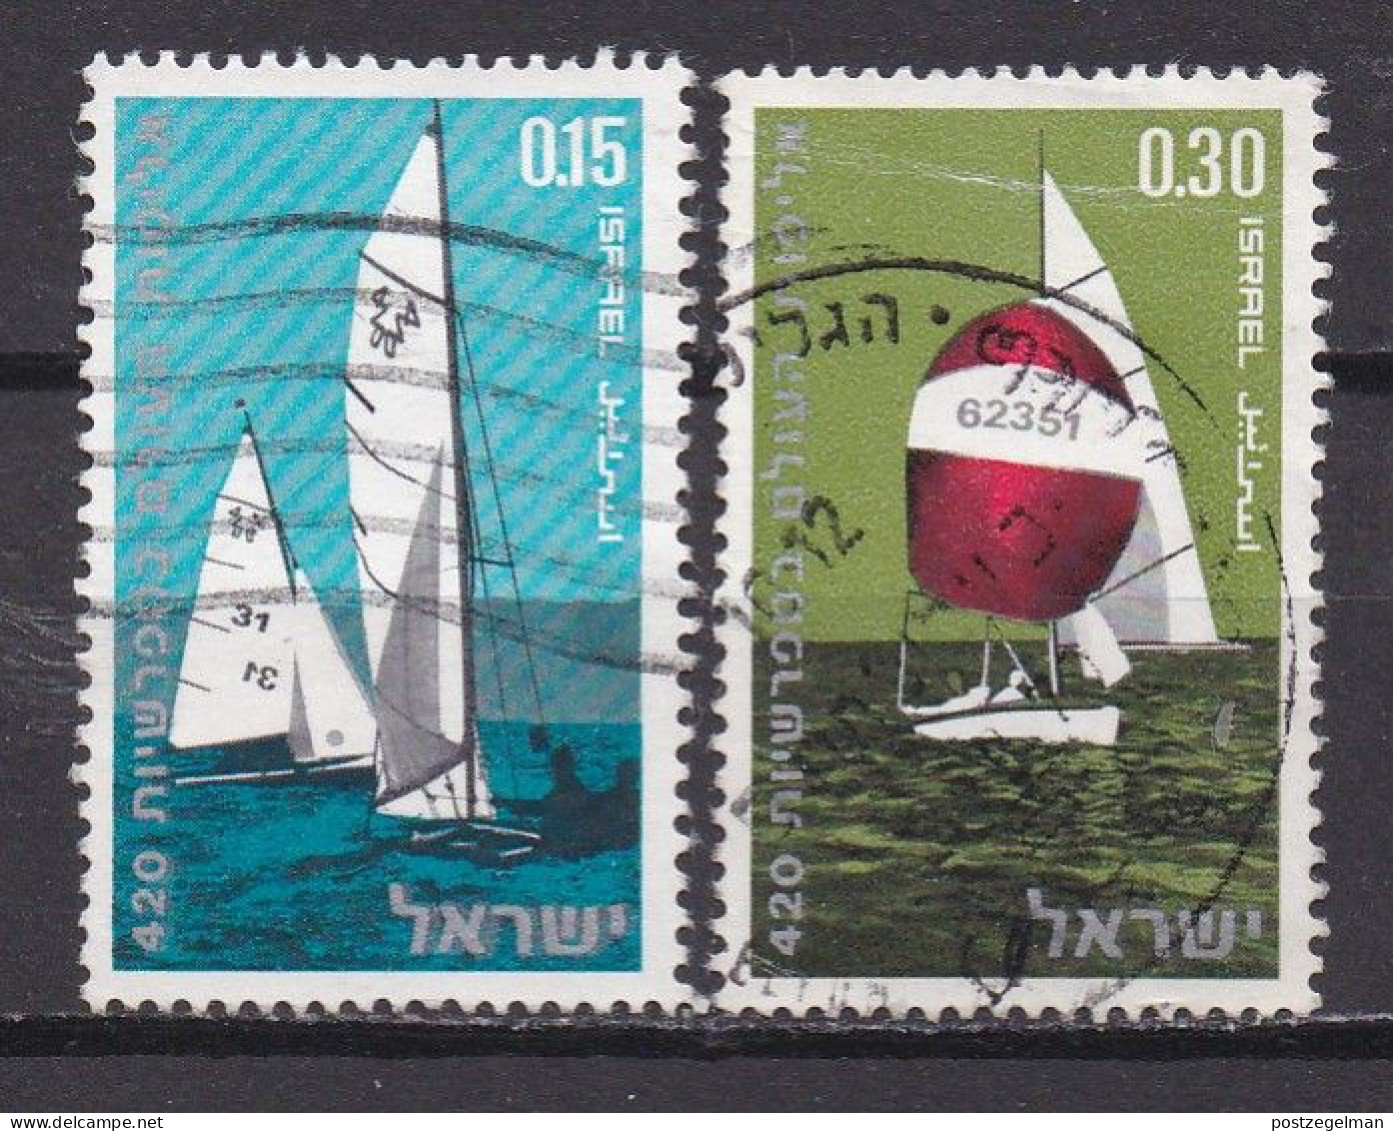 ISRAEL, 1970, Used Stamp(s), Without Tab, Sailing Championship, SG Number 451-453, Scan Number 17411 (2 Values) - Gebraucht (ohne Tabs)